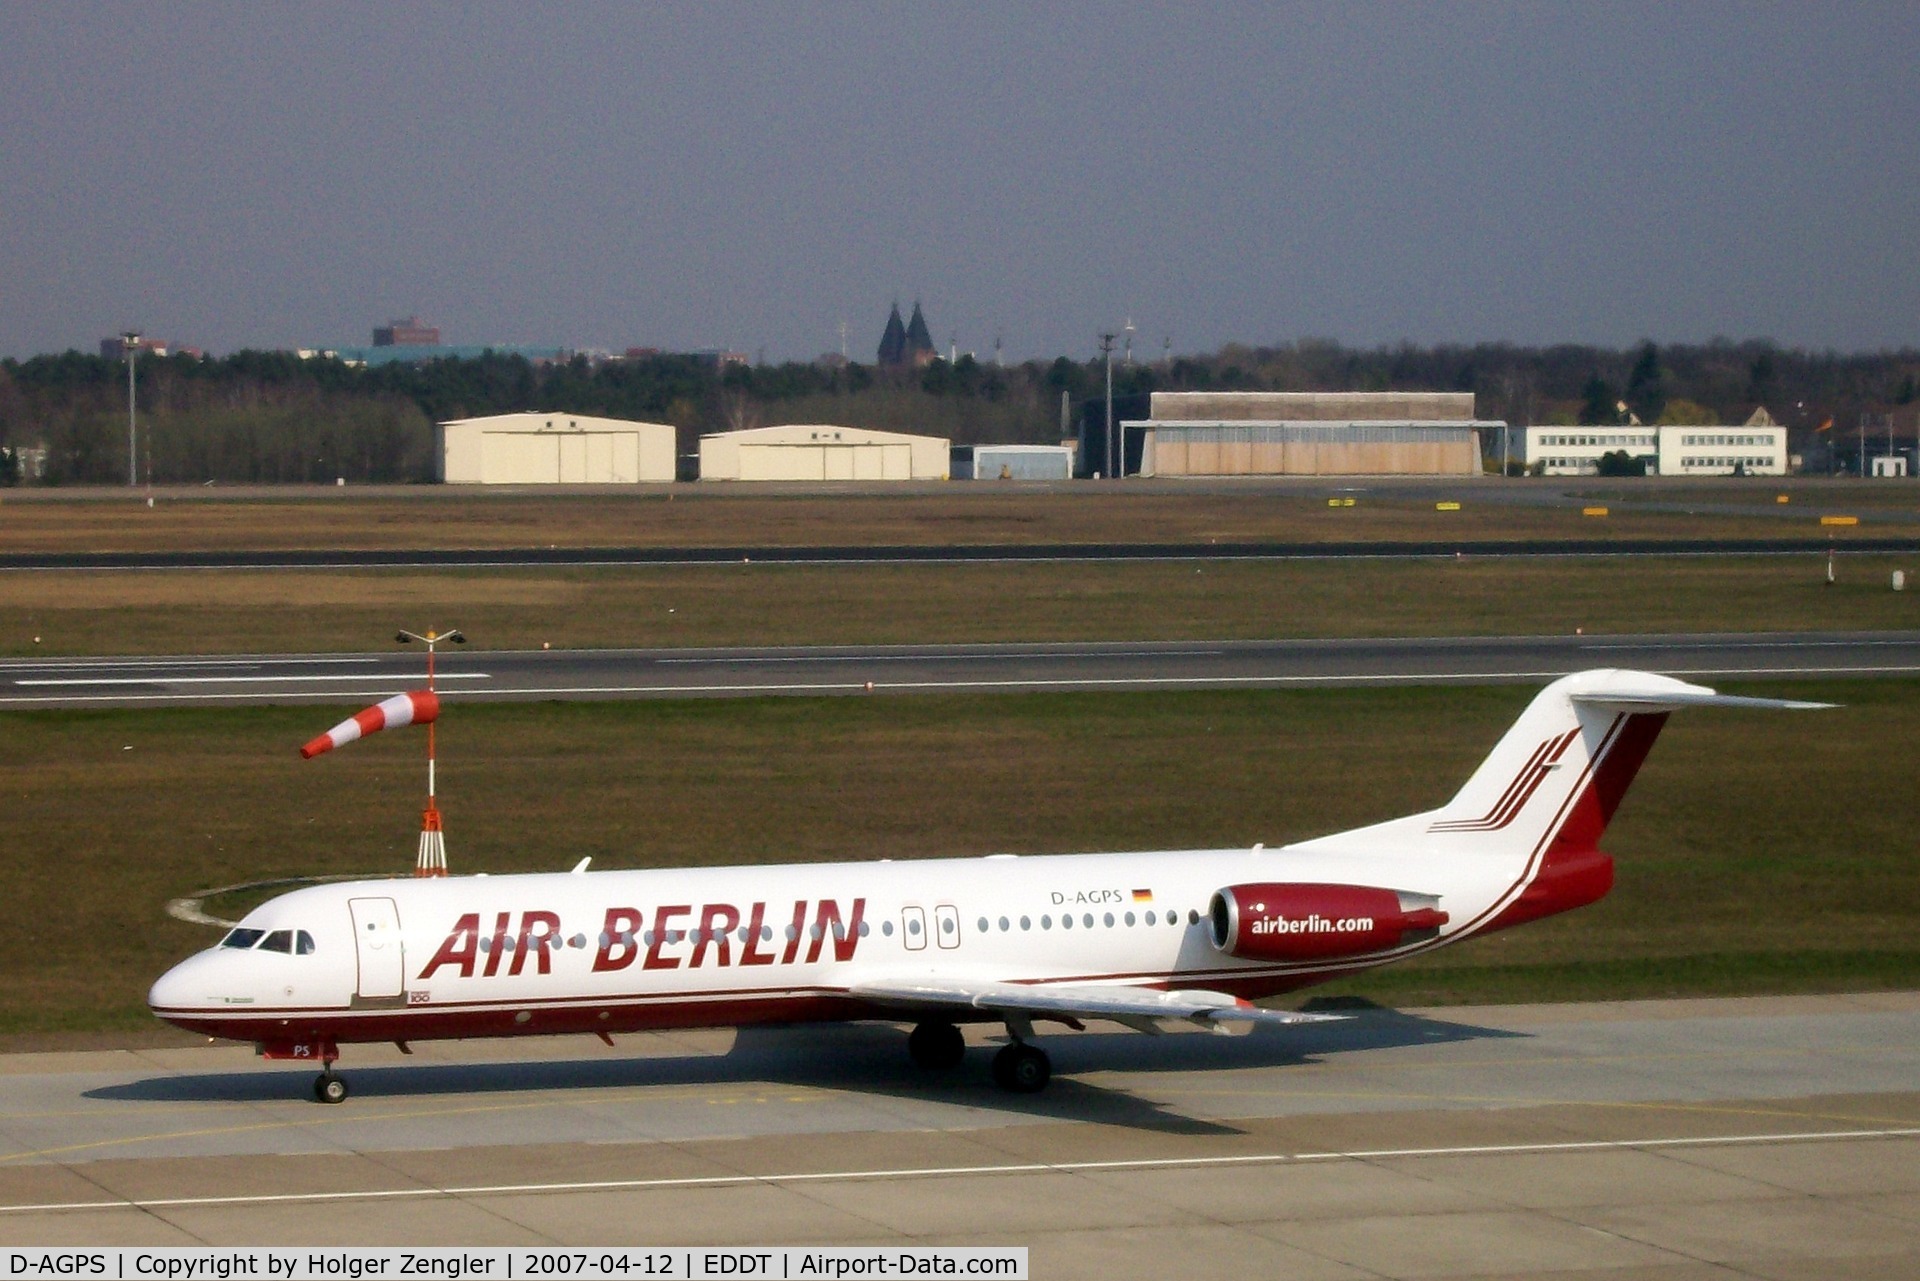 D-AGPS, 1992 Fokker 100 (F-28-0100) C/N 11399, One of the red and white Berliners